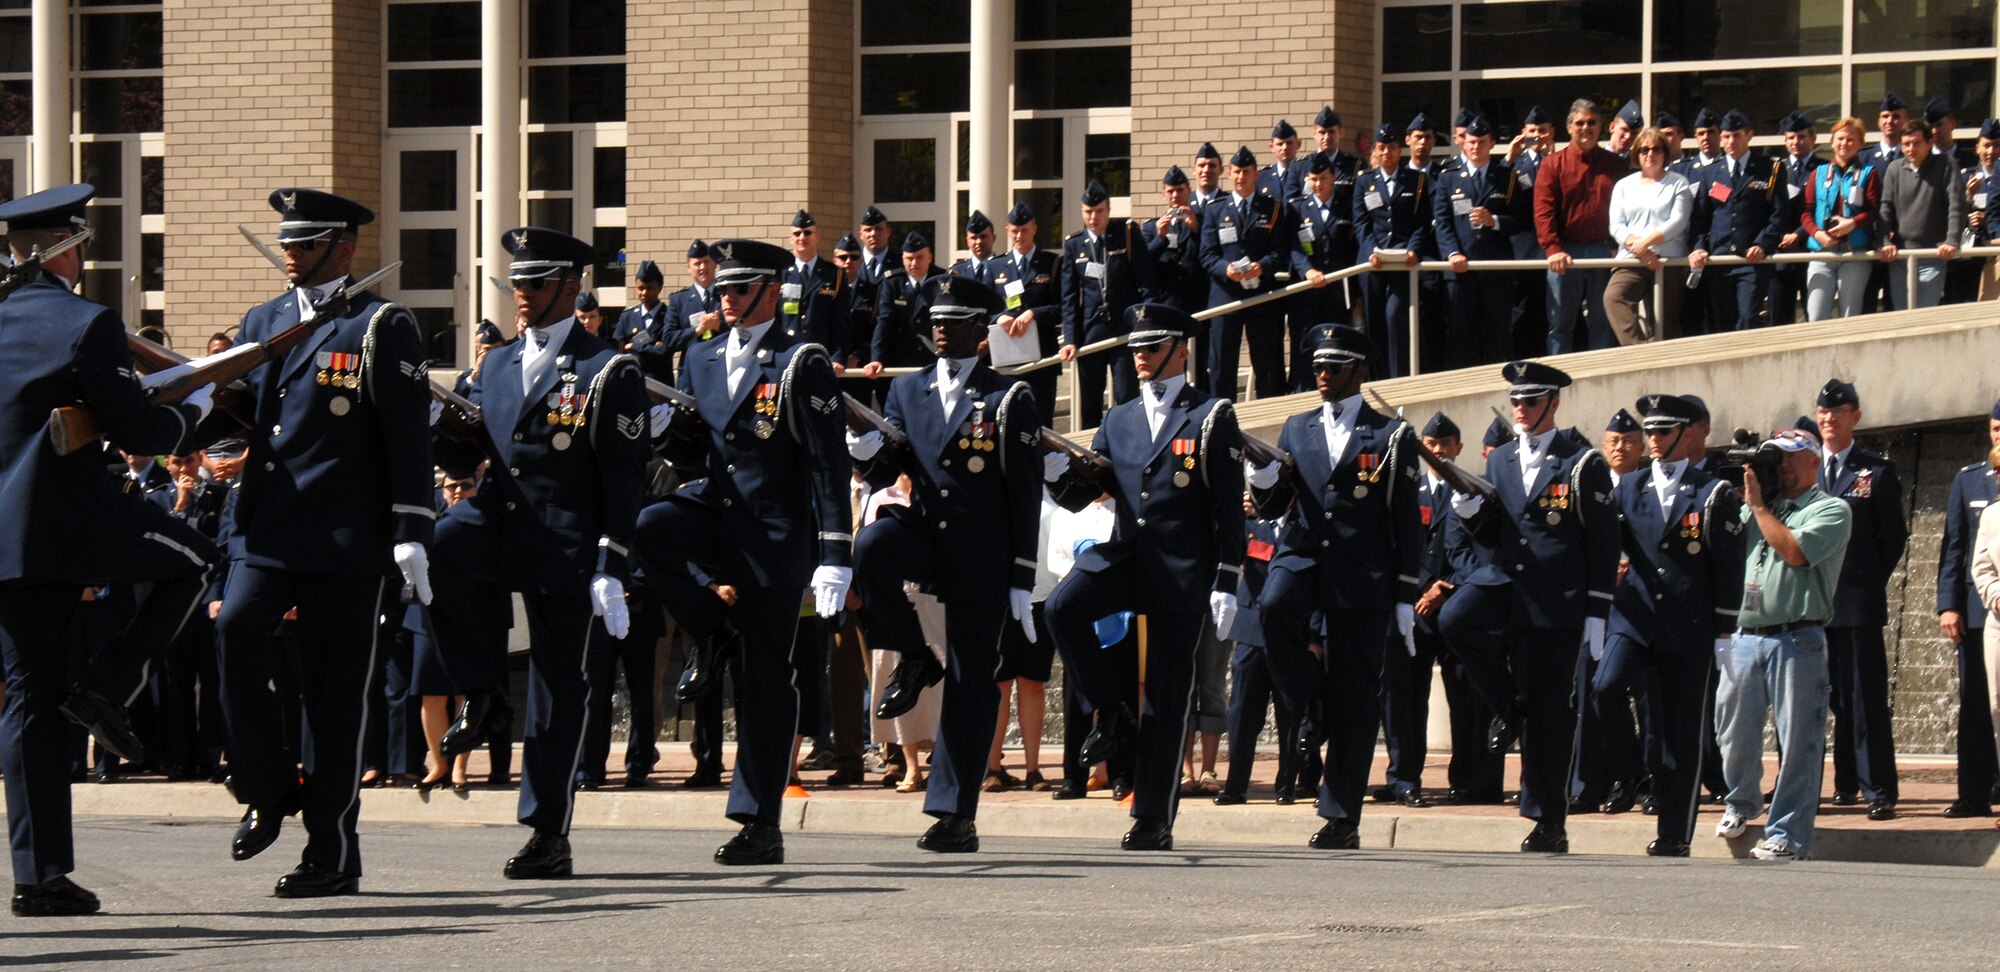 Members of the United States Air Force Honor Guard Drill Team perform for the ROTC National Conference April 8. (U.S. Air Force photo by Staff Sgt. Madelyn Waychoff)